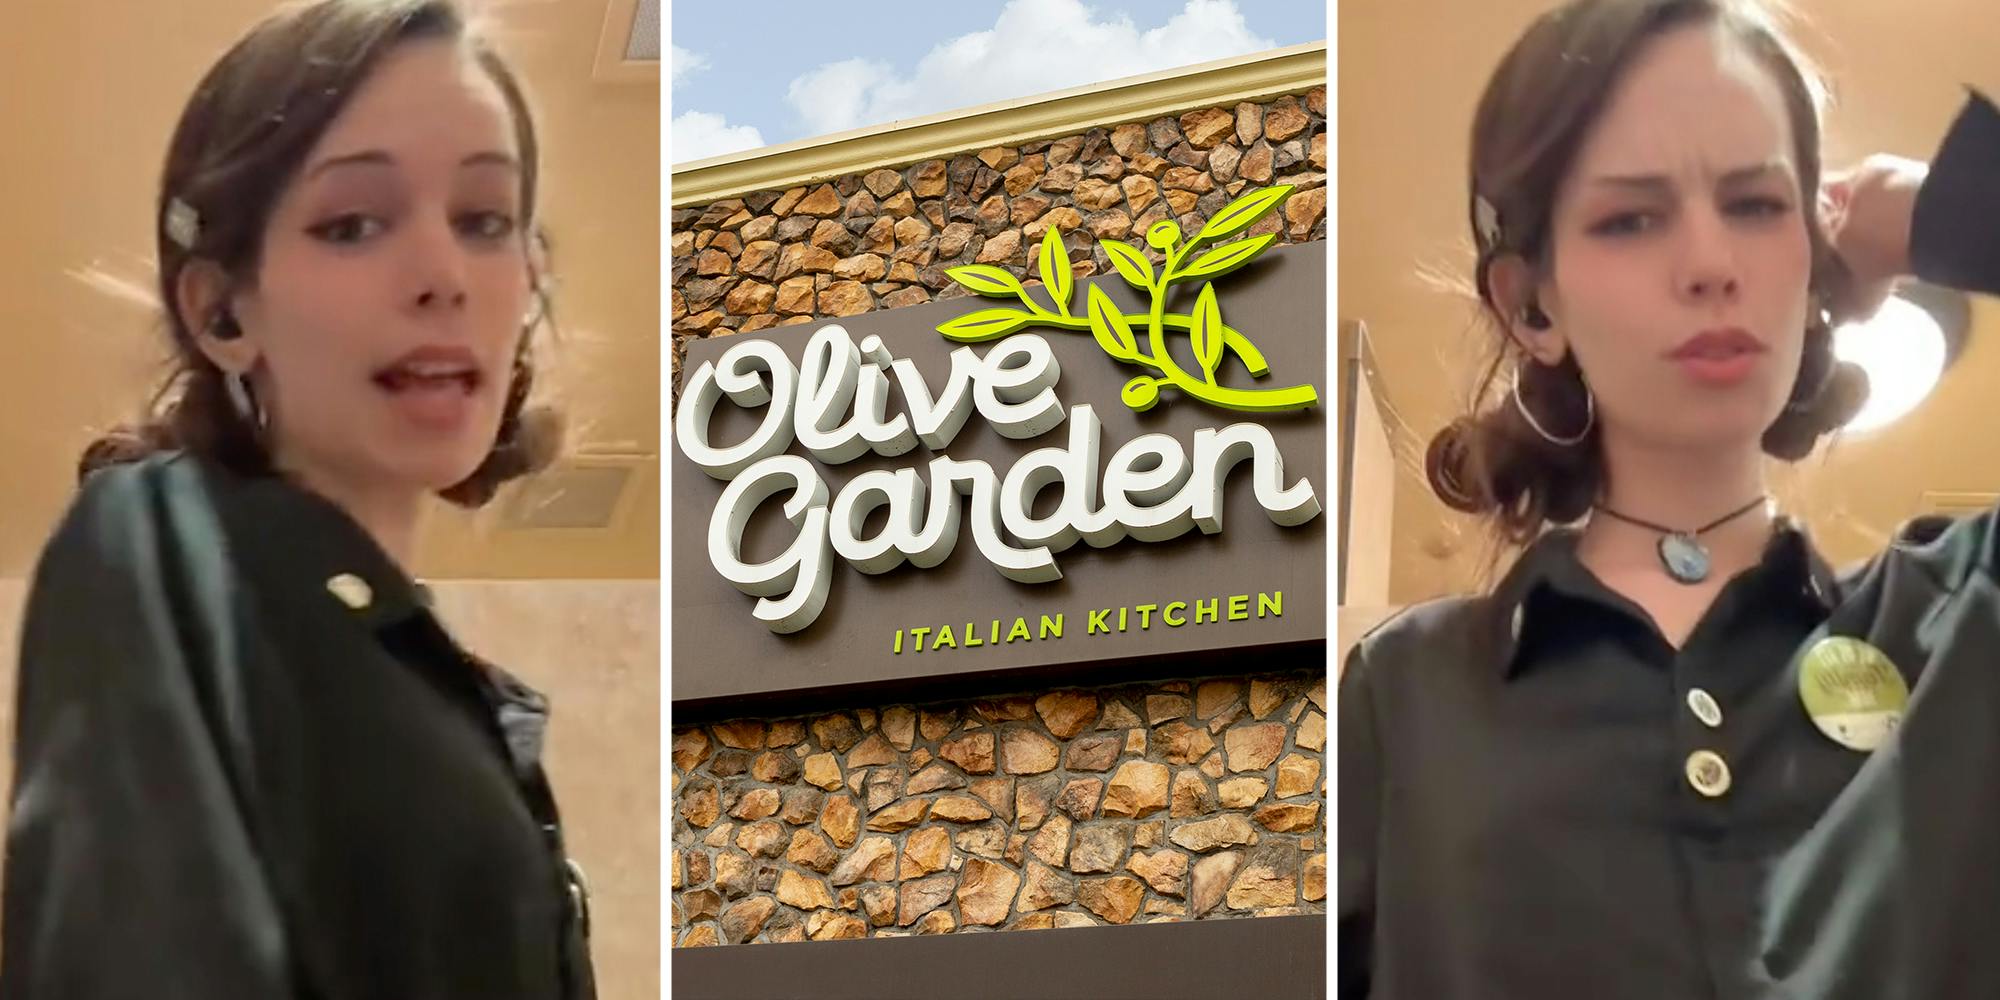 Woman dancing(l+r), olive garden sign(c)